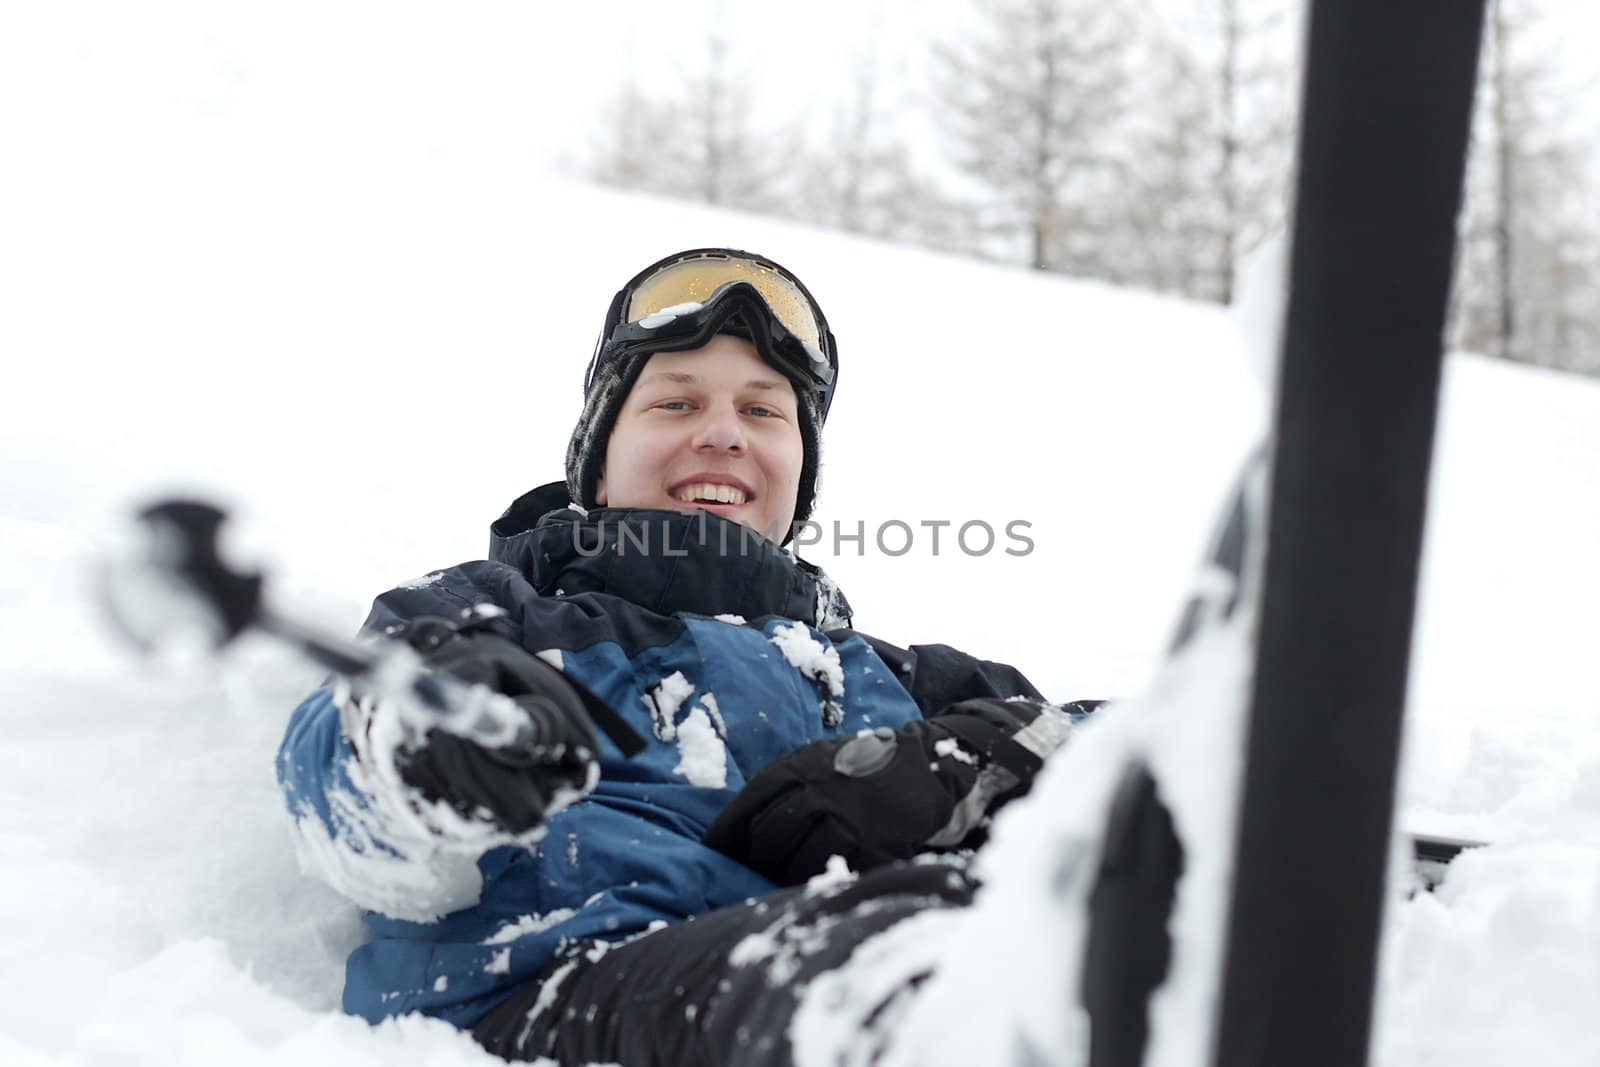 Skier resting in the snow